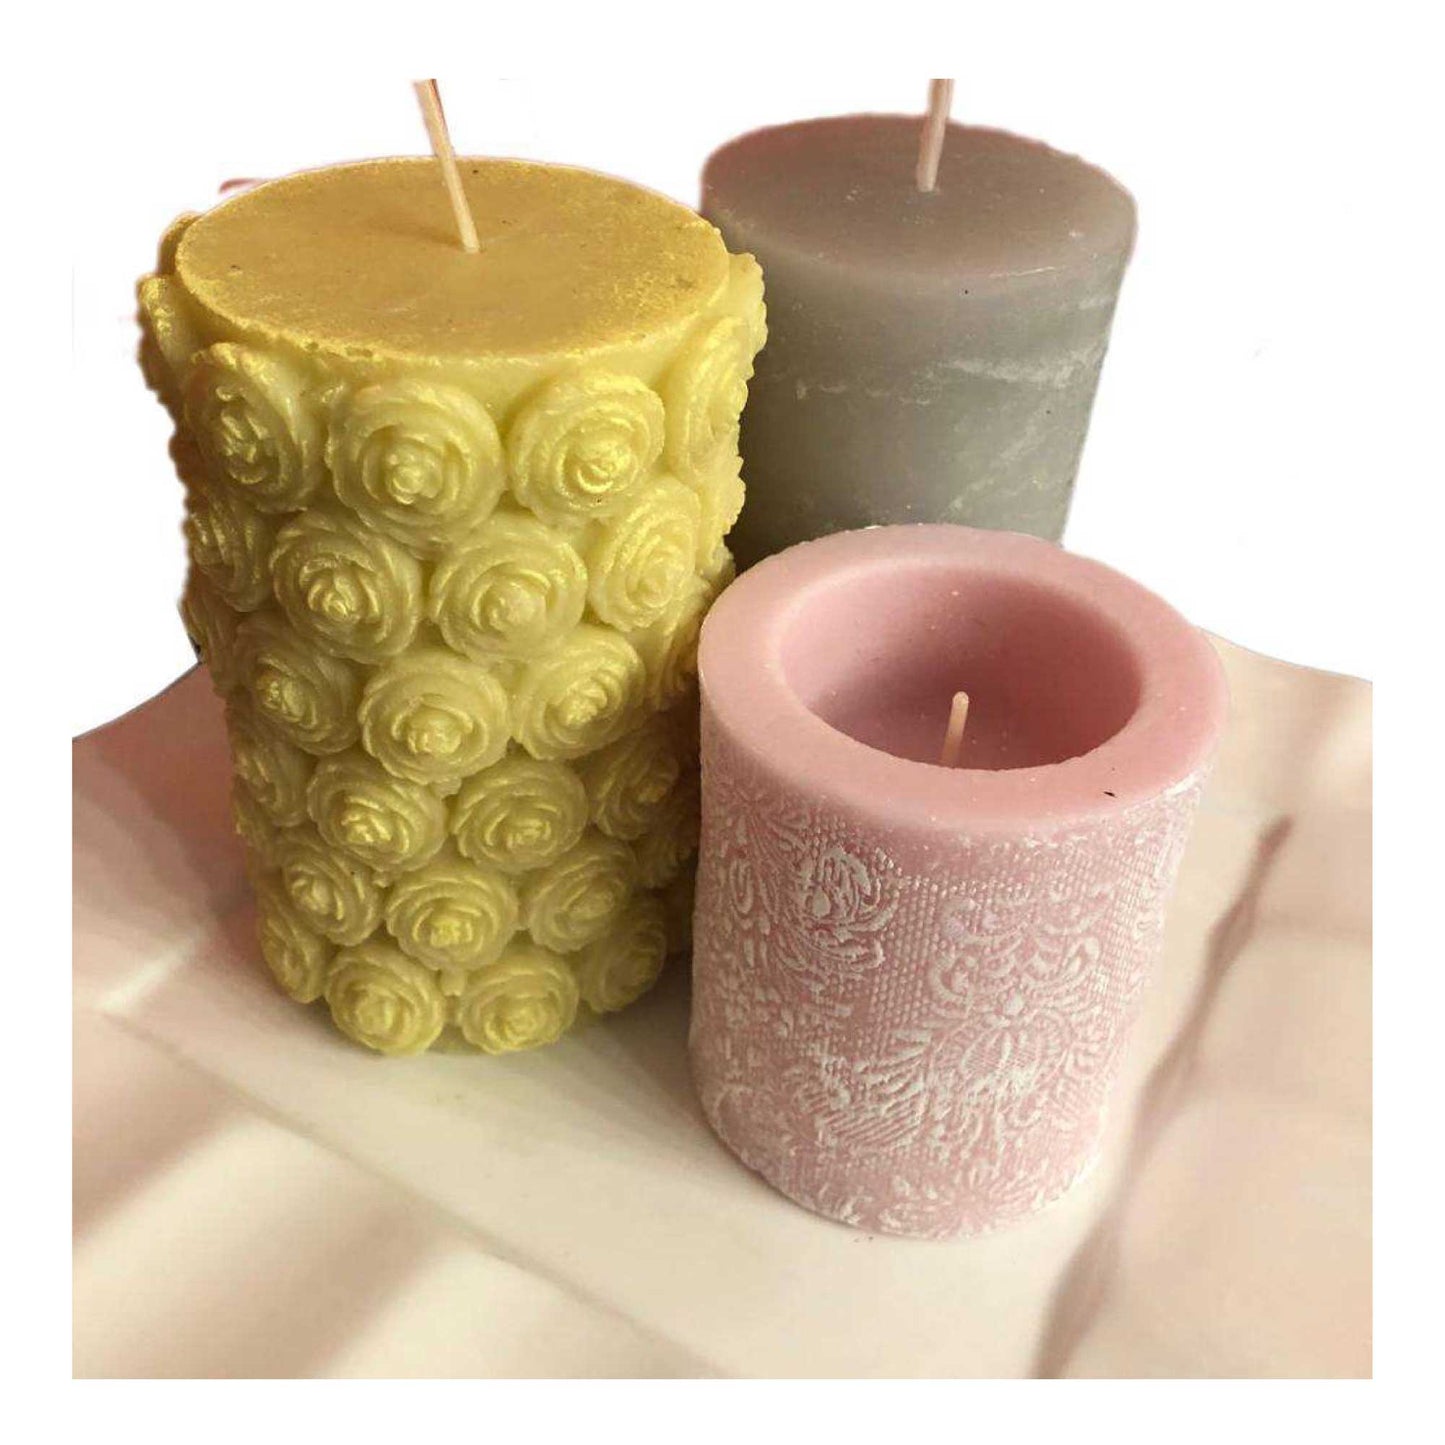 5Kg Paraffin Wax Blocks - Refined Hard Unscented Chunks 60/62 Candle Soap Making